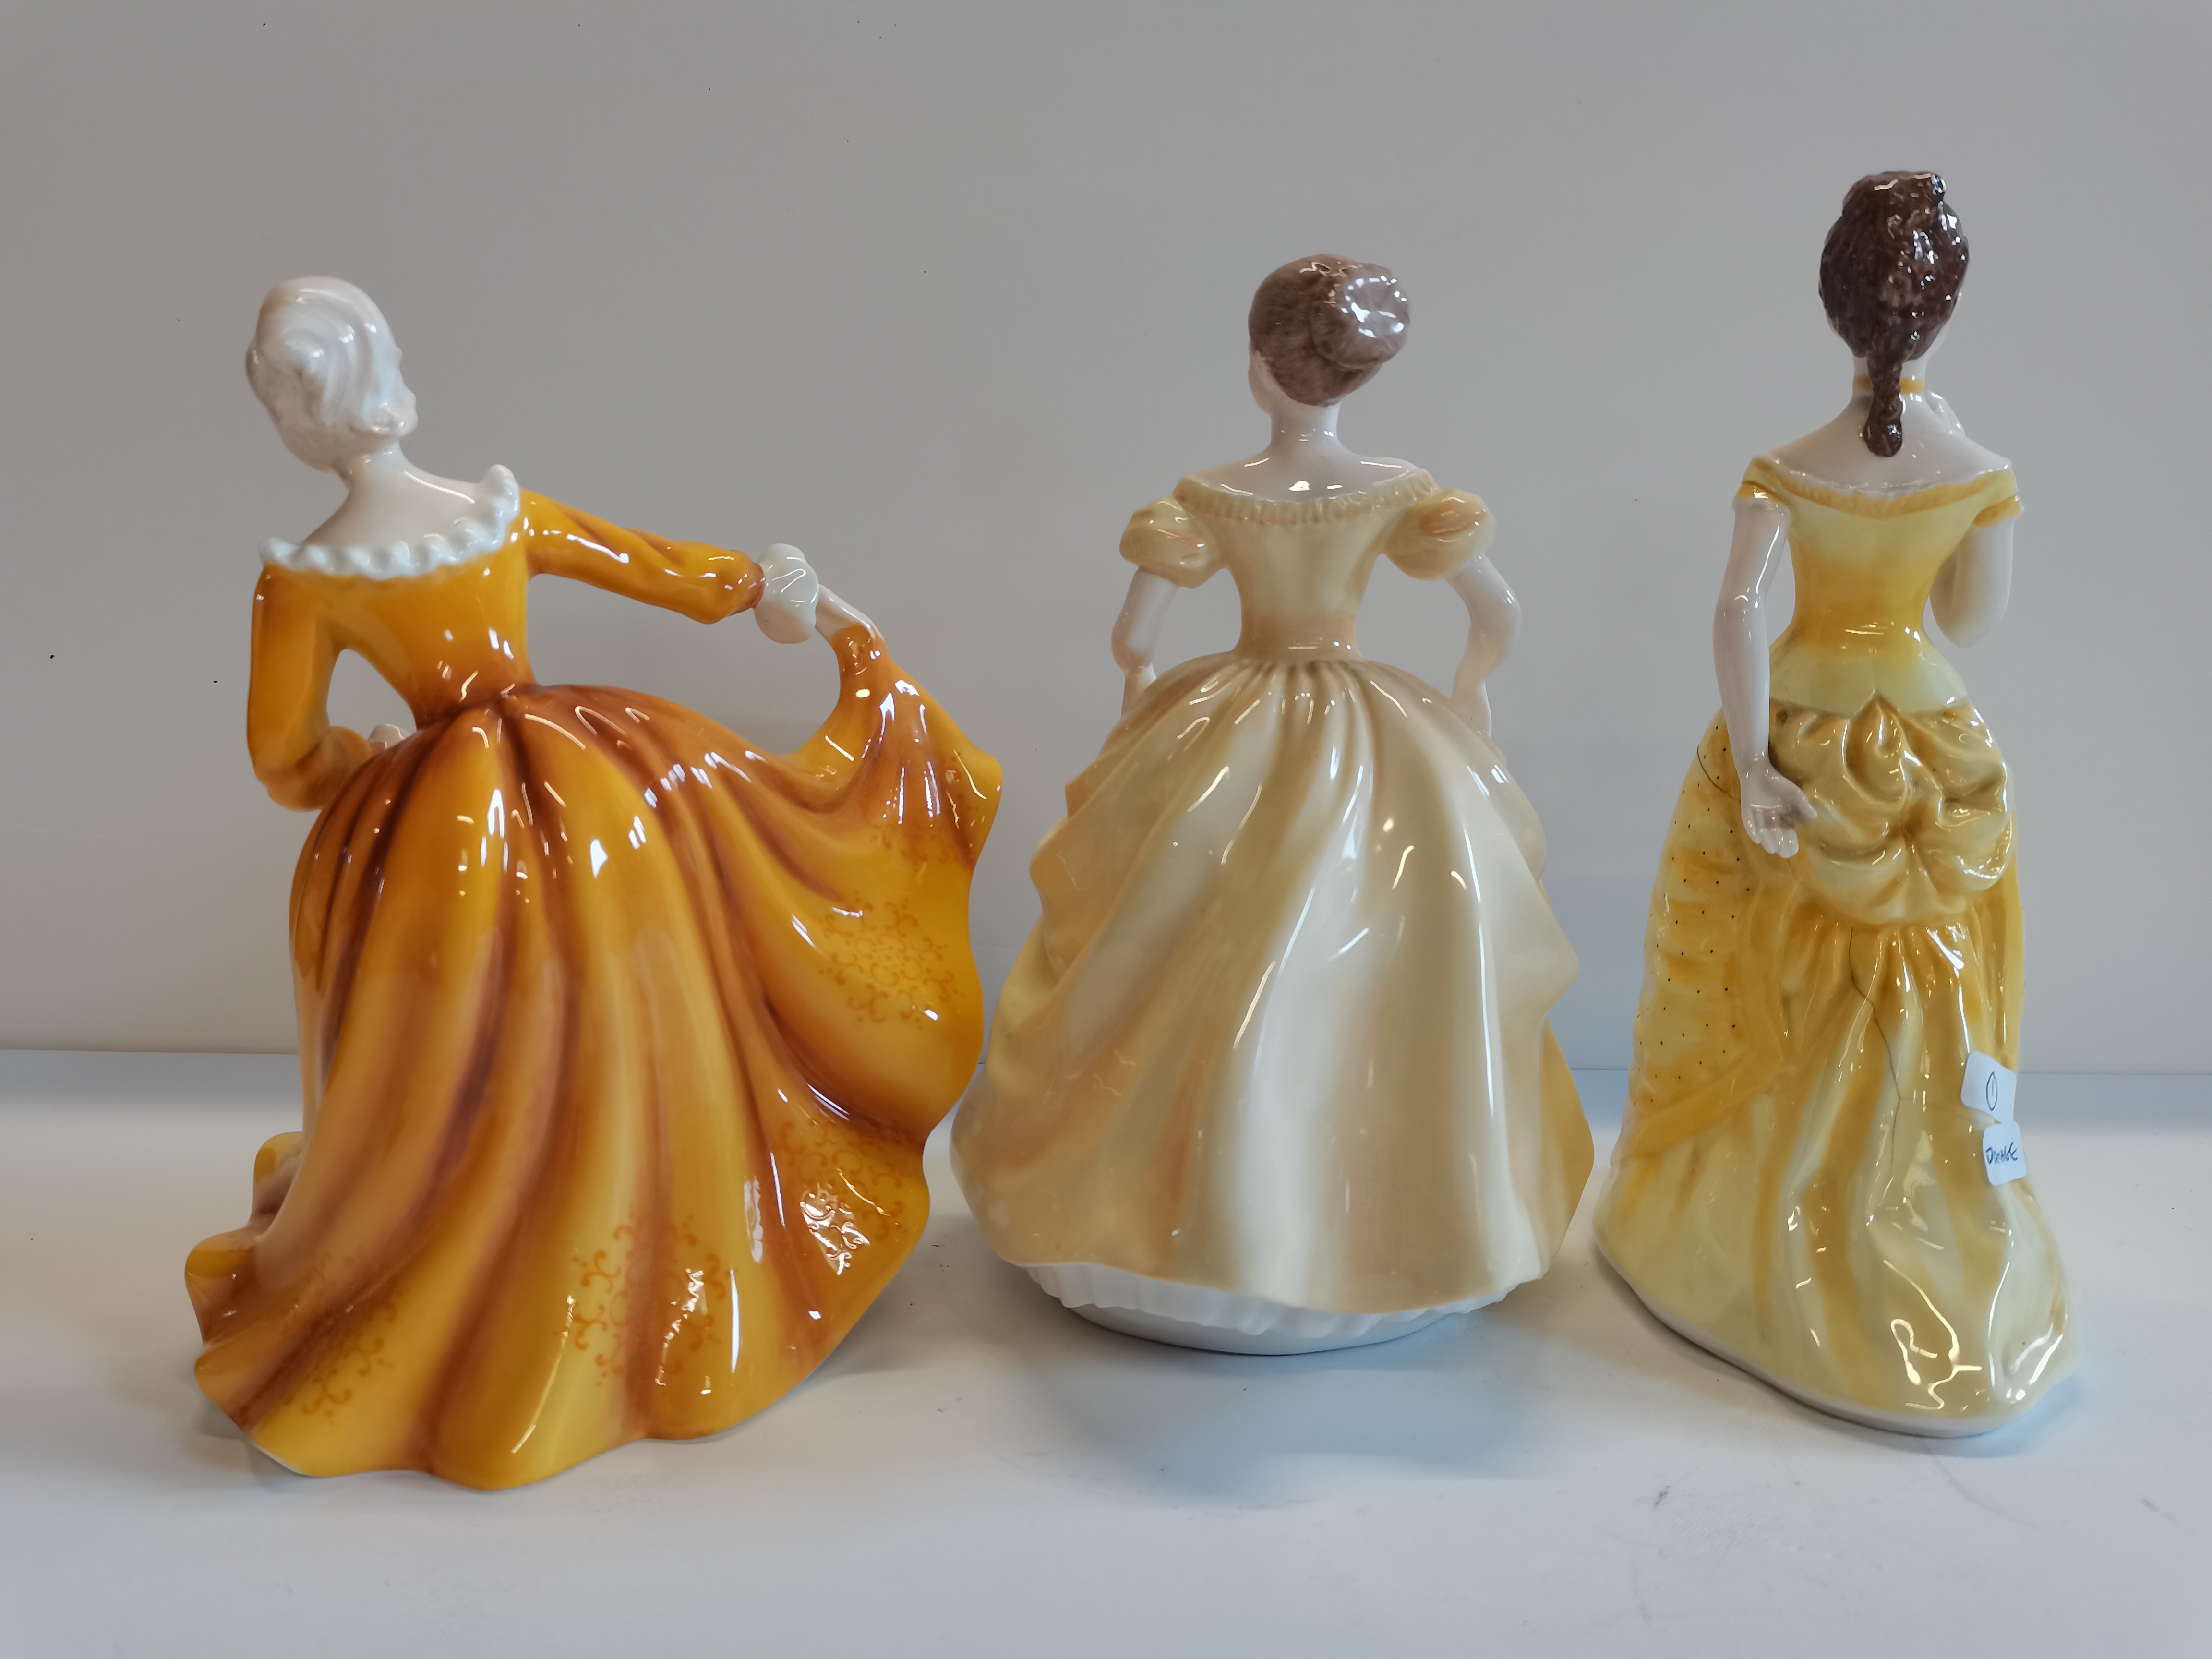 X2 Coalport ladies - Frances, Ladies of Fashion 'Emily' and Royal Doulton lady 'Kirsty' - Image 4 of 12